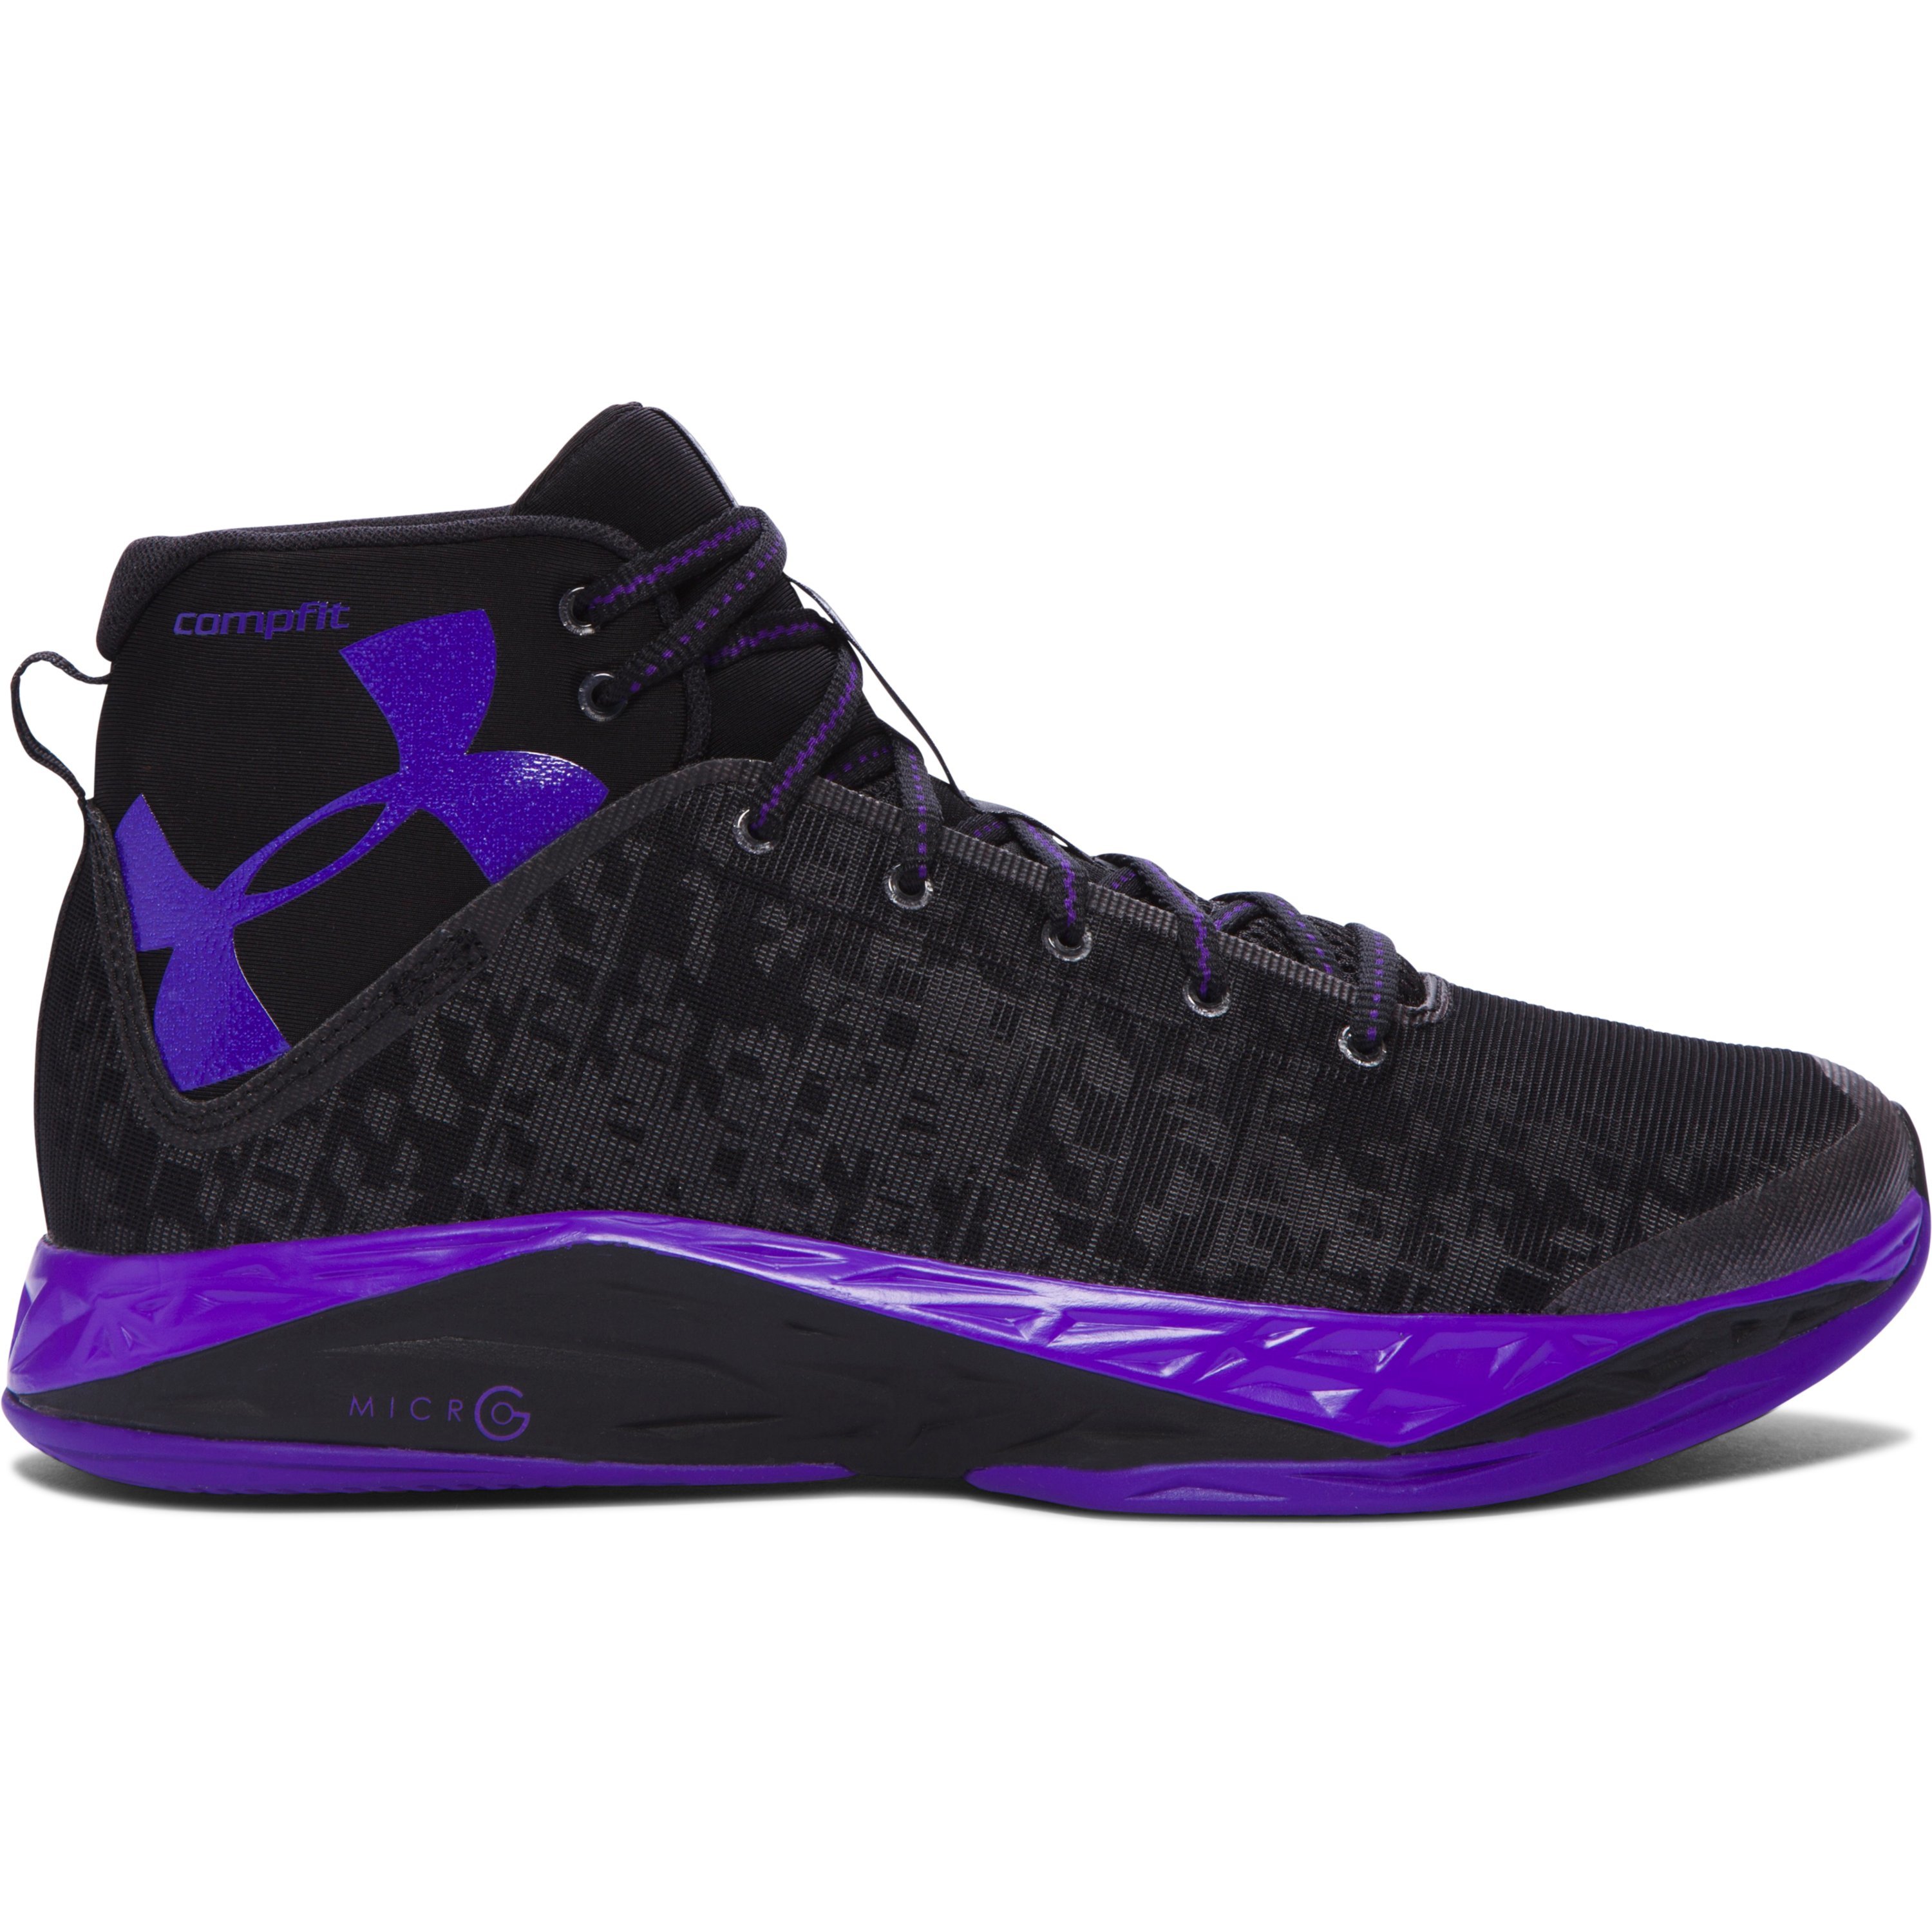 Under armour Men's Ua Fireshot Basketball Shoes in Purple